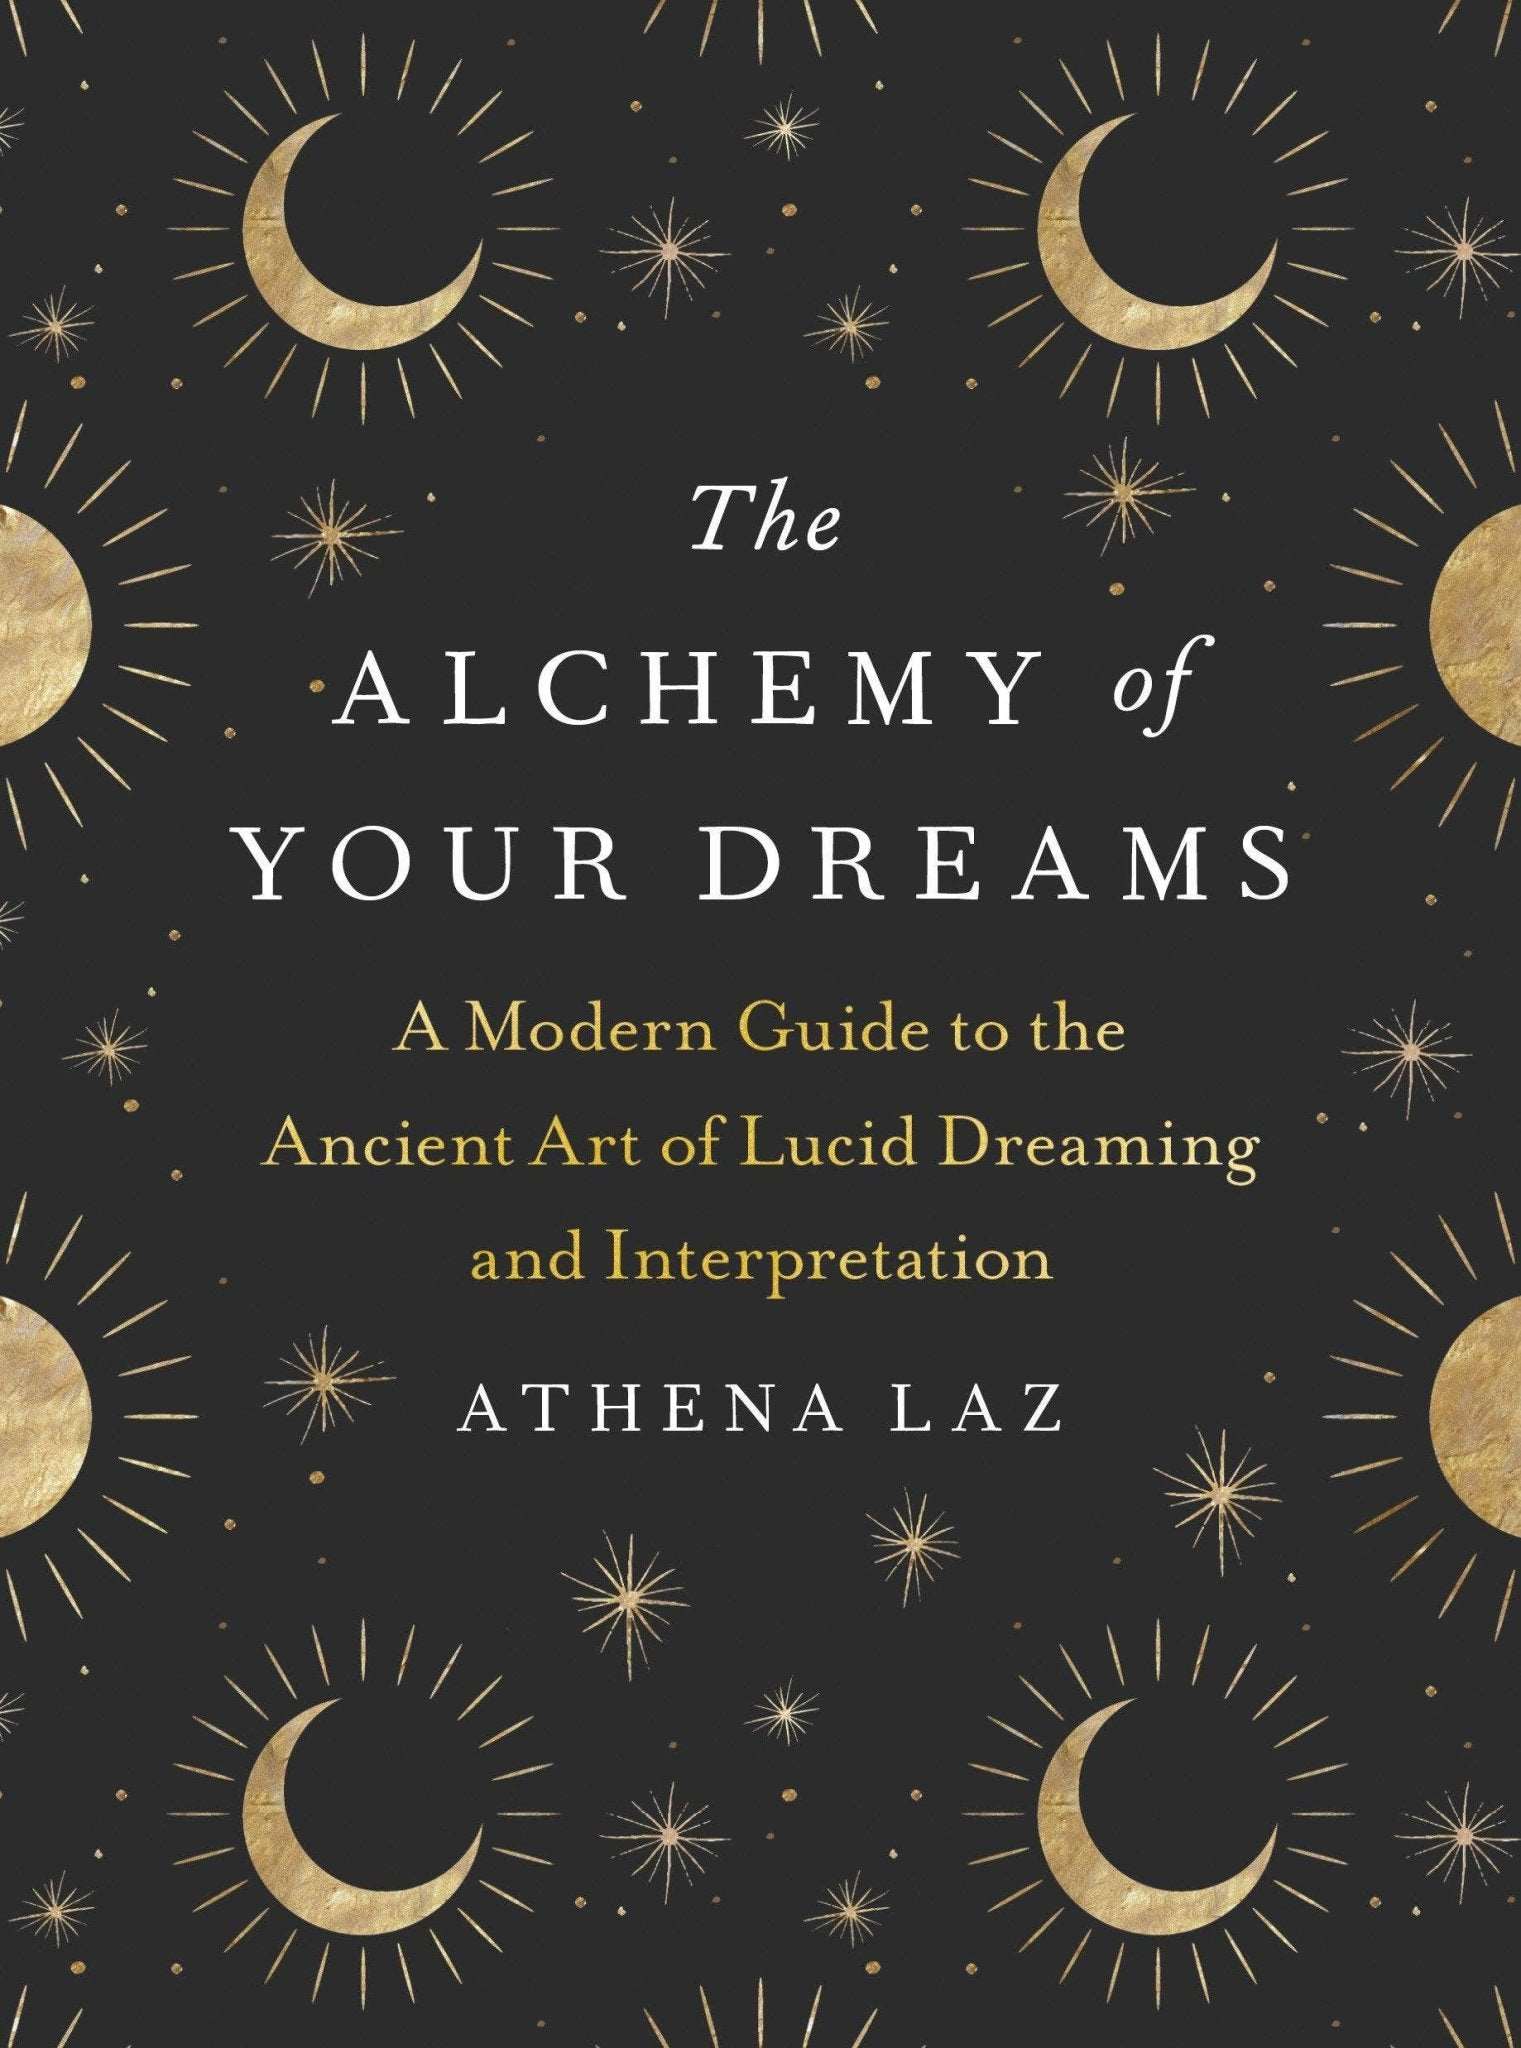 Alchemy of Your Dreams: The Ancient Art of Lucid Dreaming - Nocturne LLC